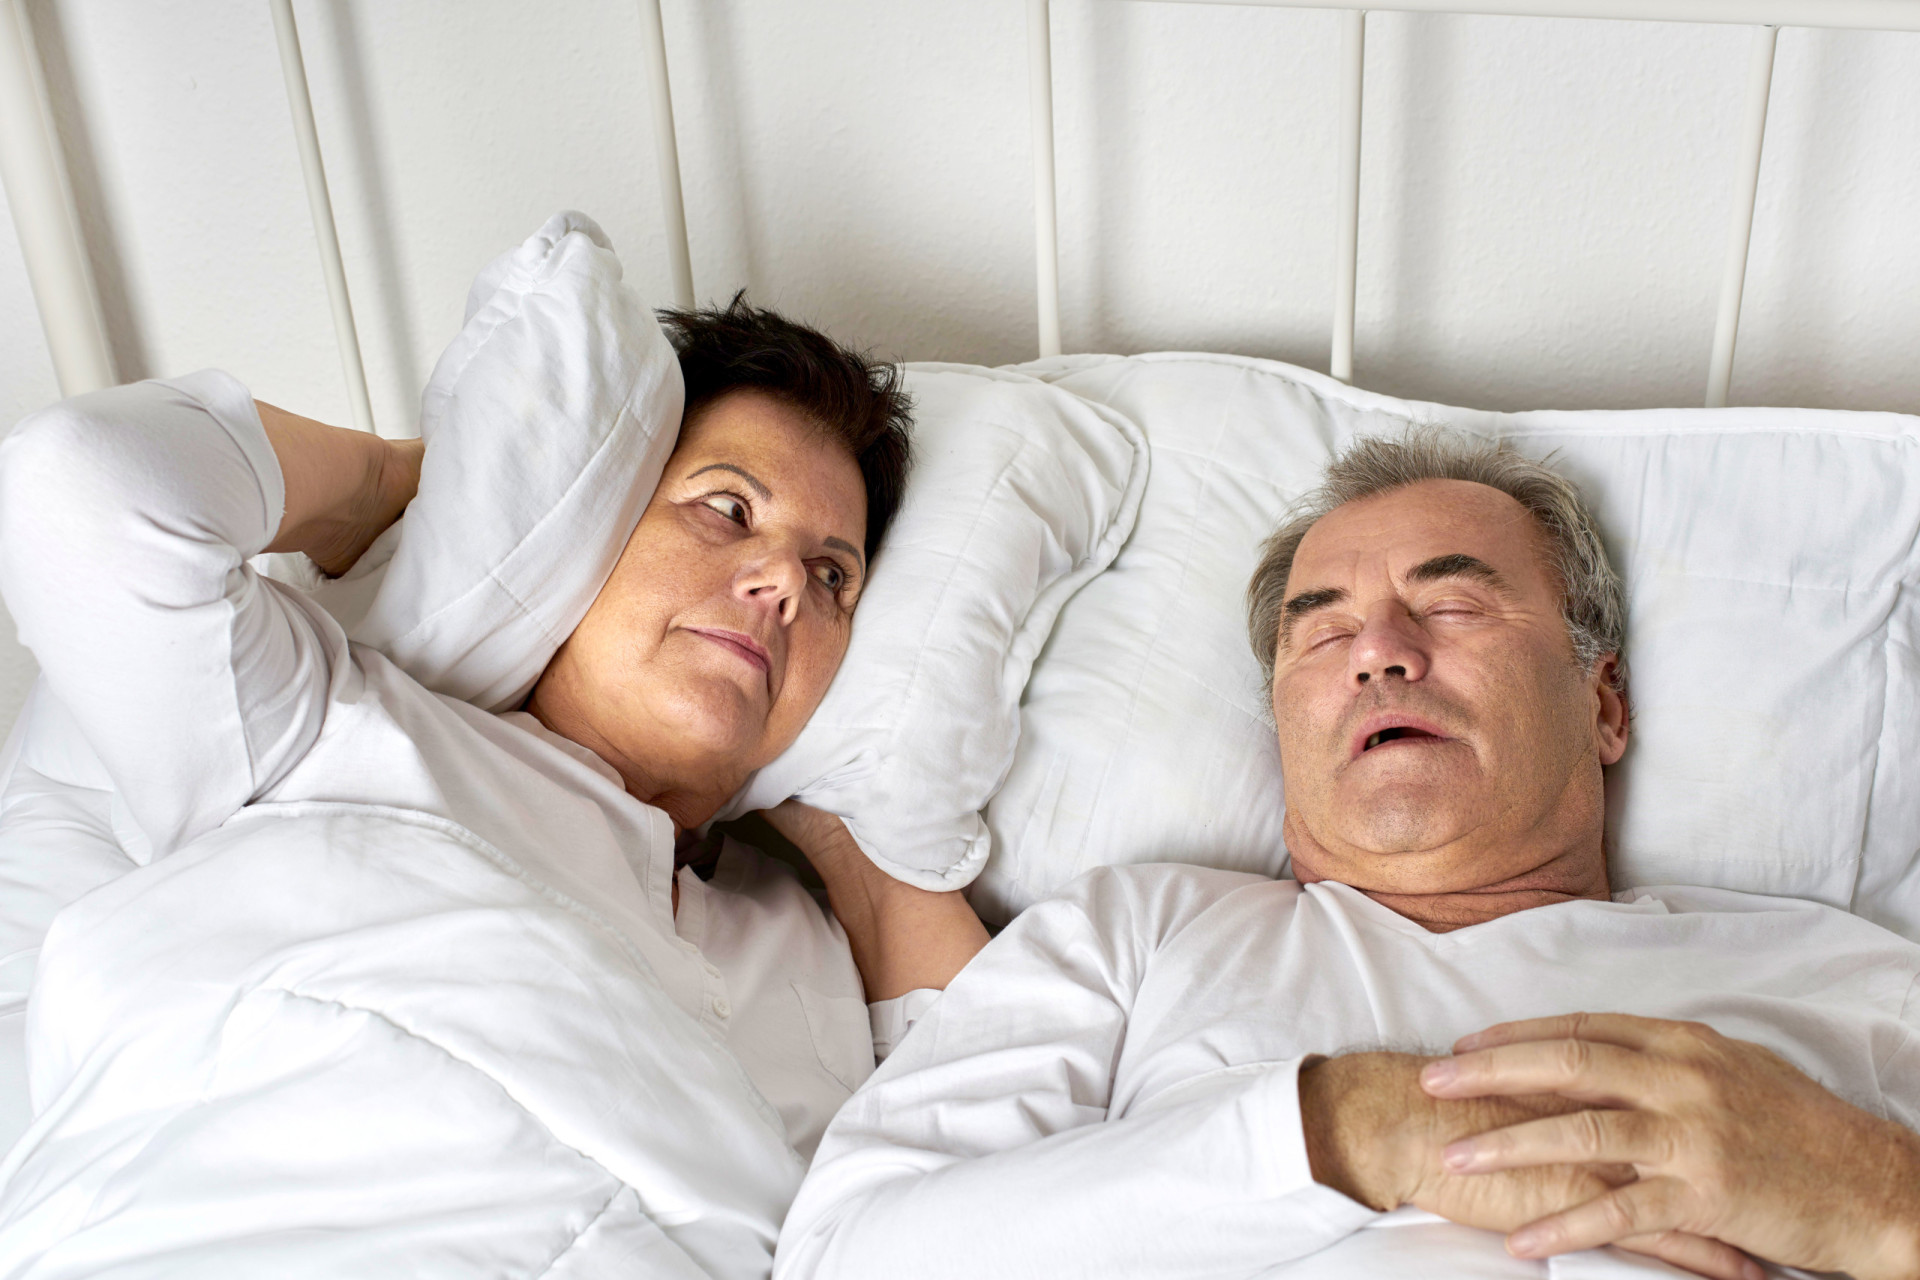 Why snoring is more dangerous than you think